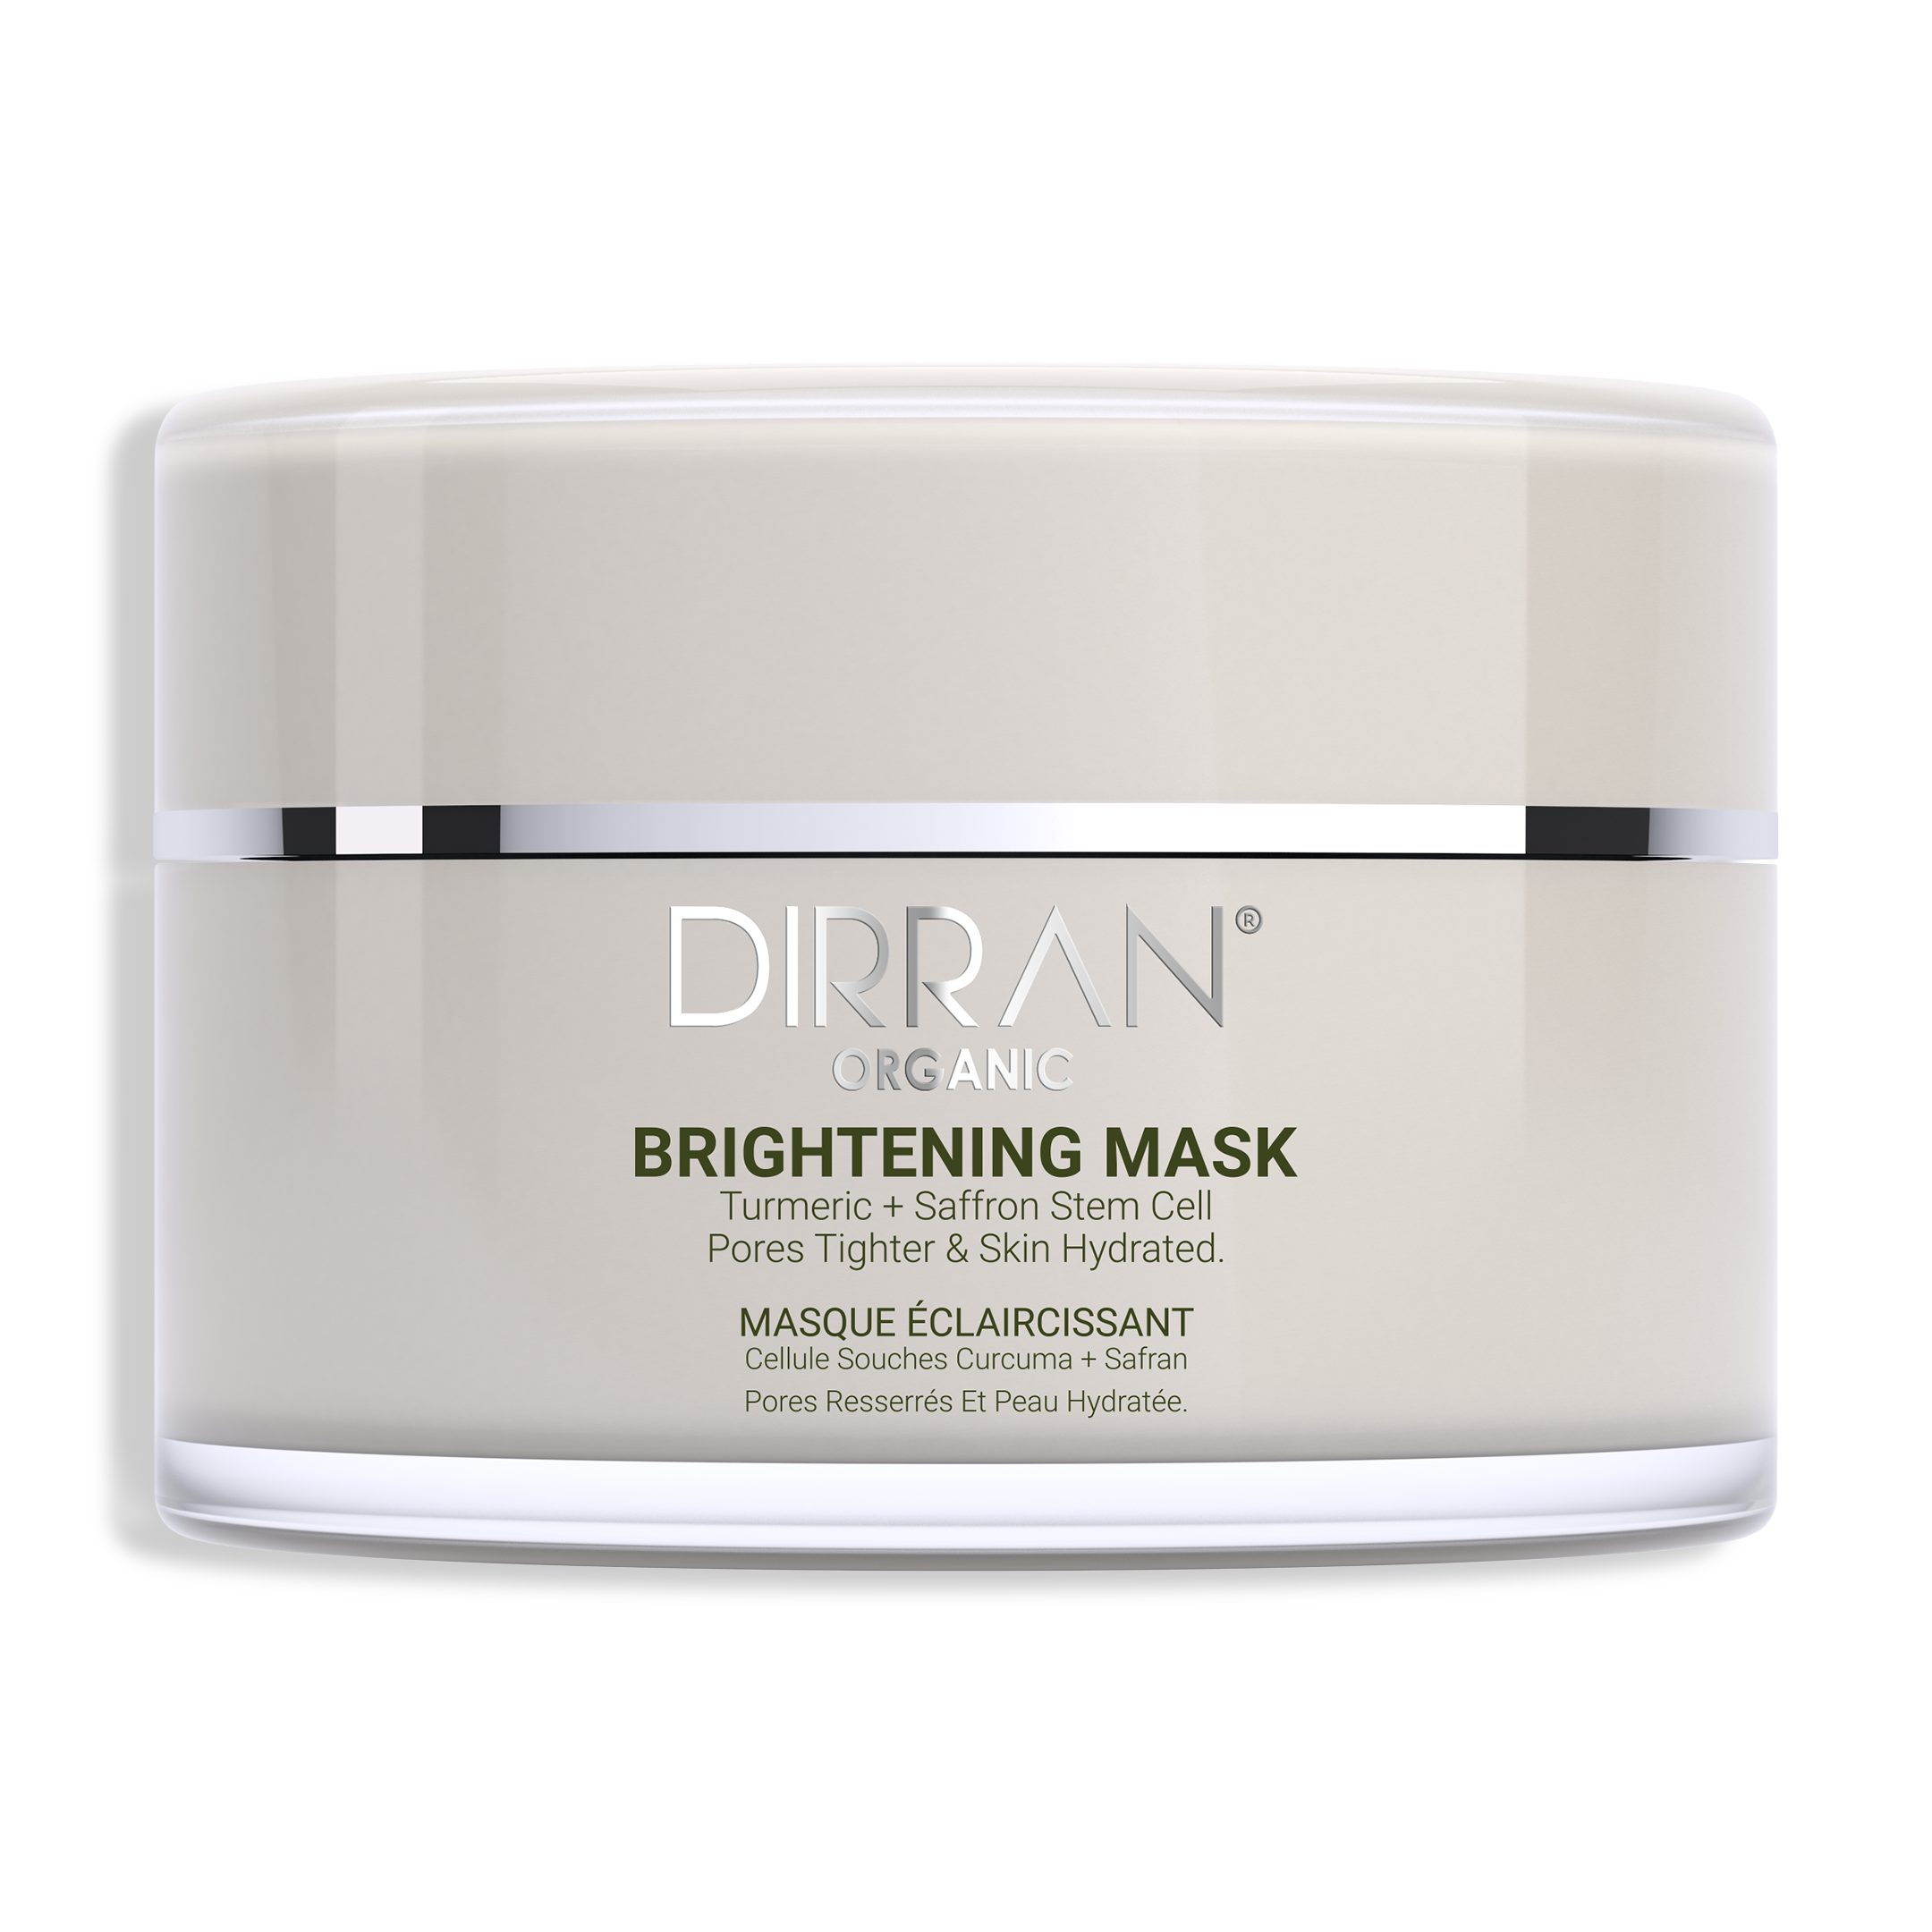 BRIGHTENING MASK Pores Tighter and Skin Hydrated